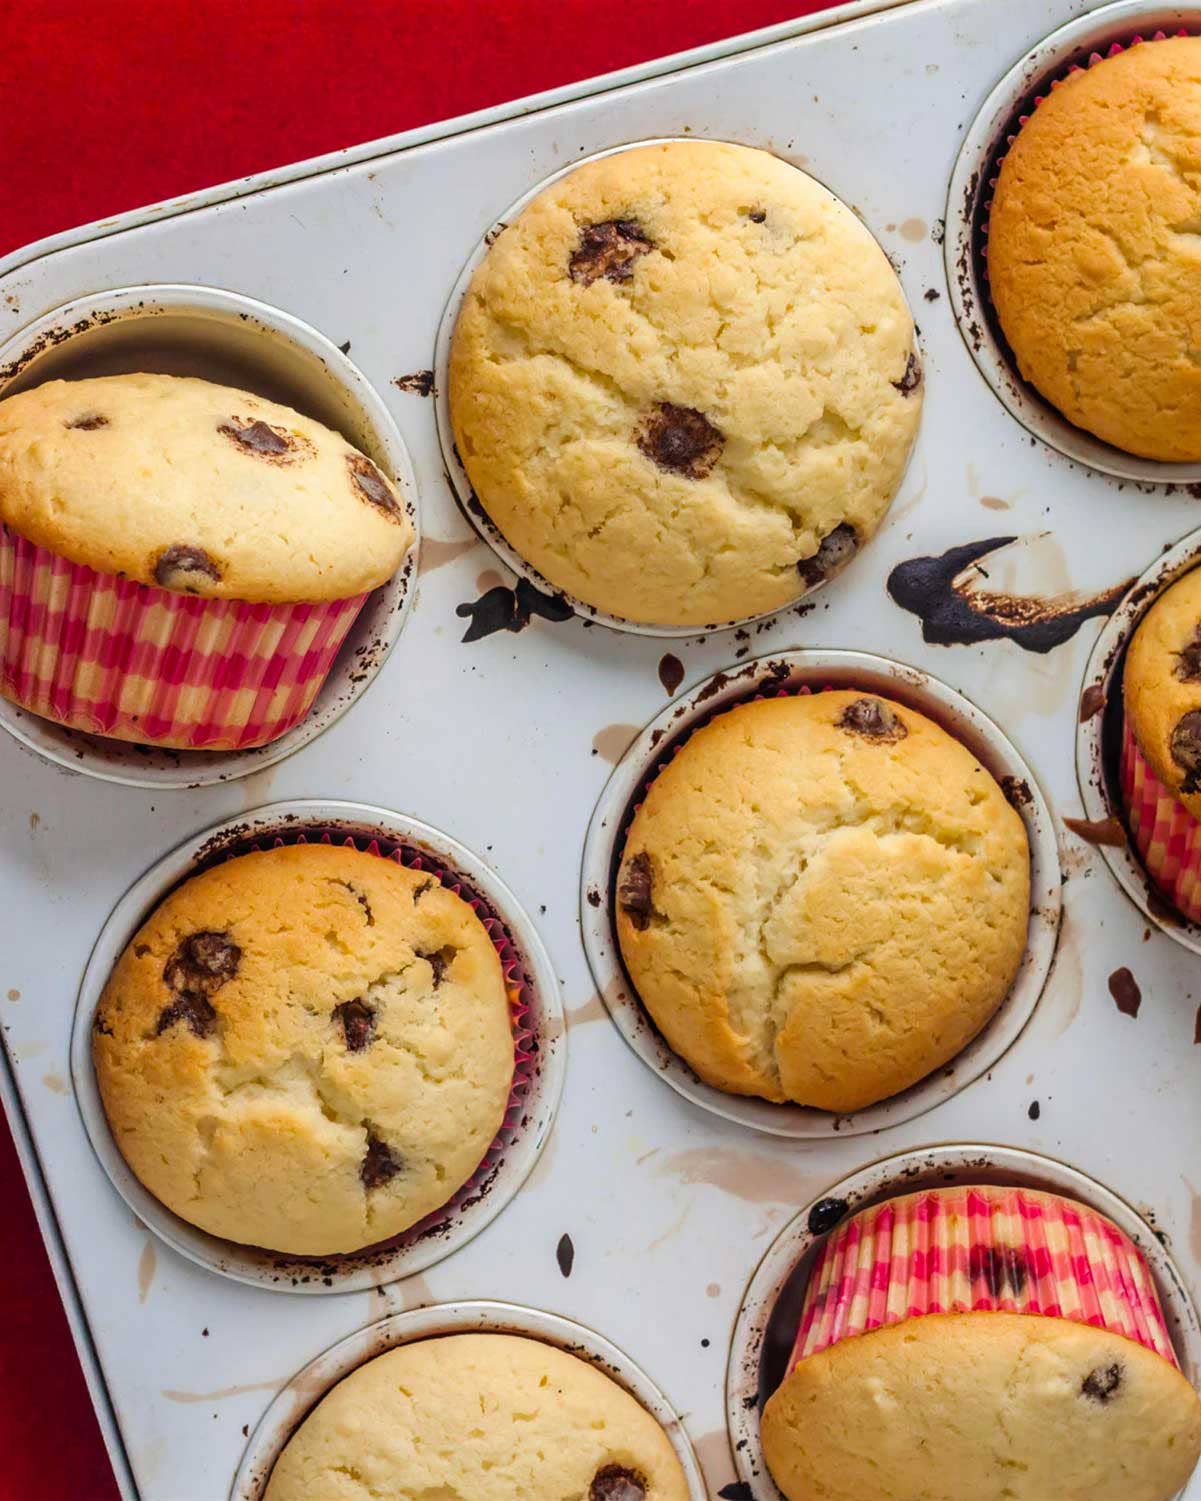 Muffins on a red tablecloth